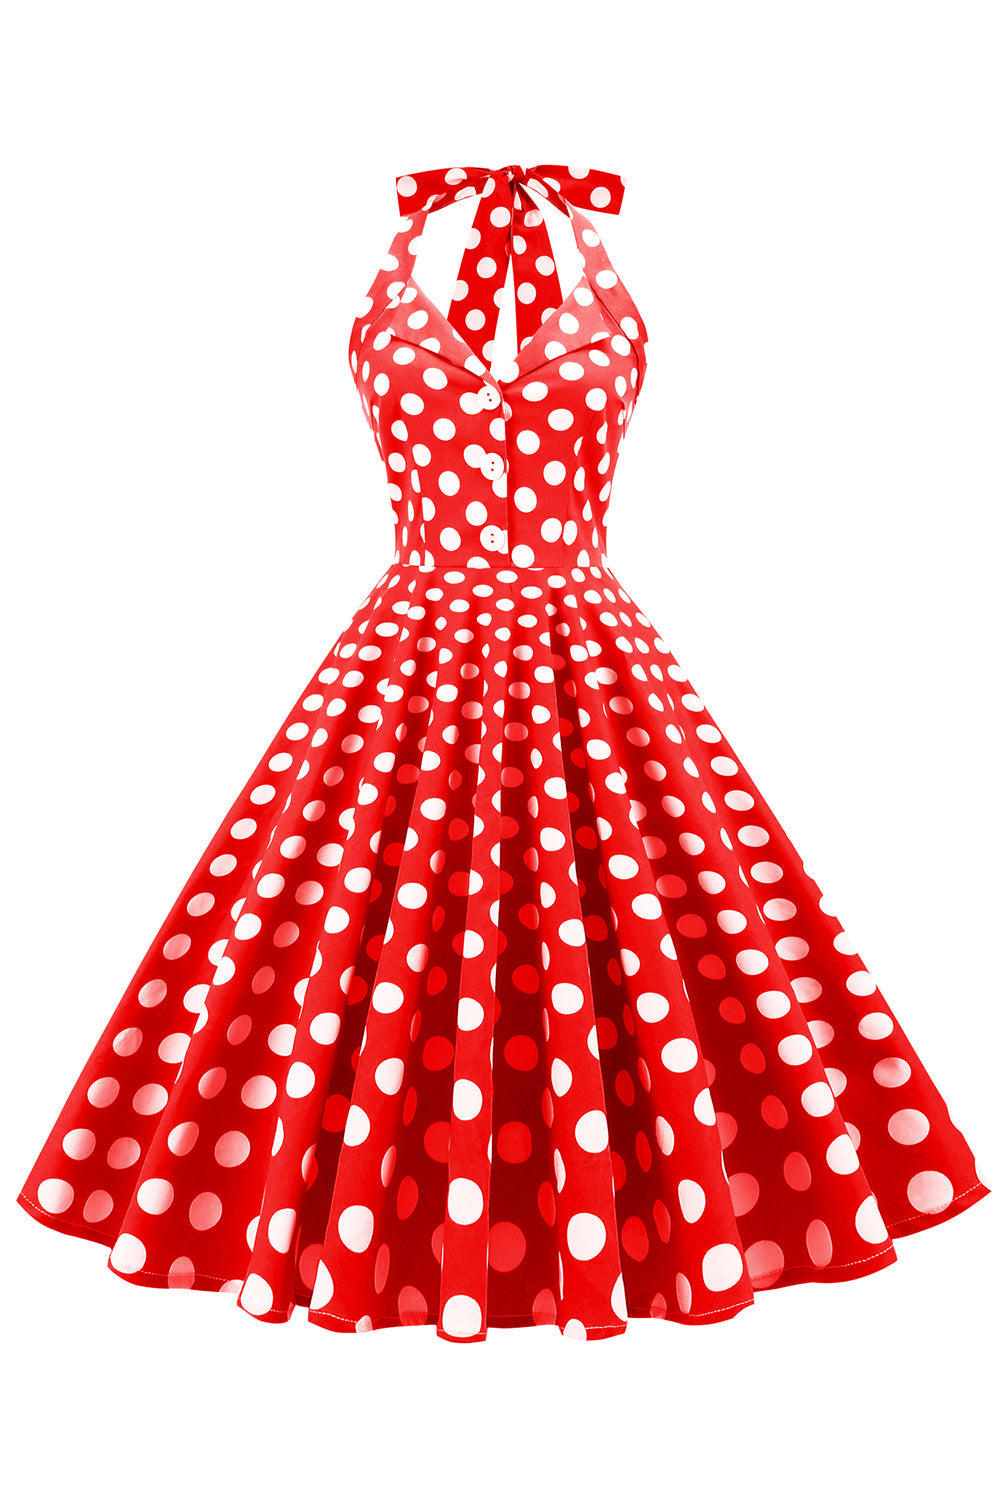 Rotes Button Polka Dots 1950er Jahre Pin Up Kleid